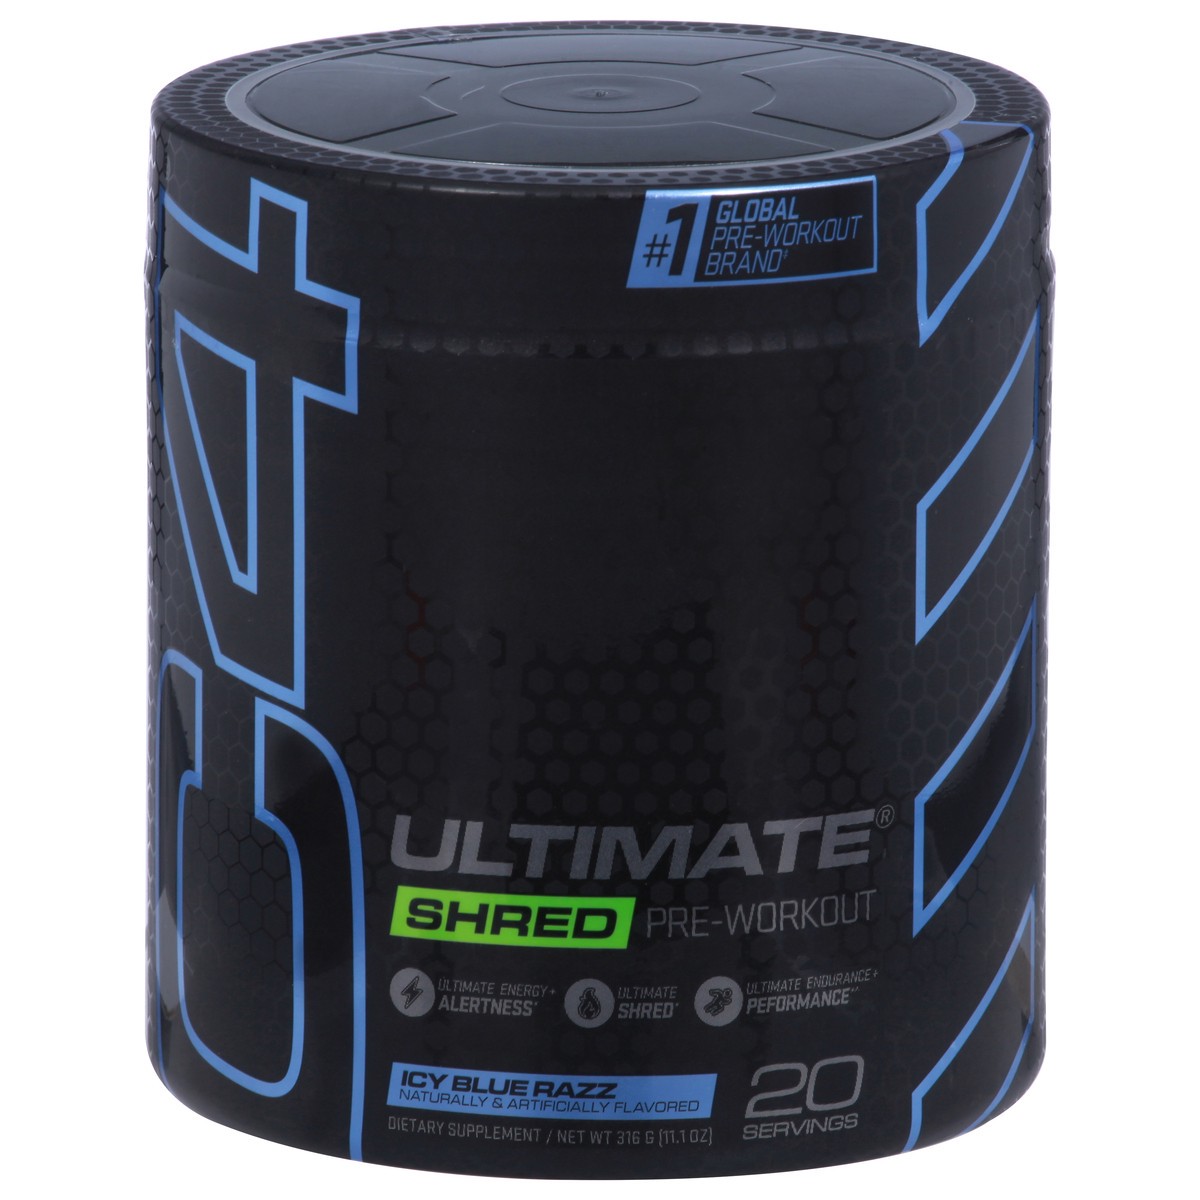 slide 1 of 10, C4 Sport Ultimate Shred Icy Blue Razz Pre-Workout 11.1 oz, 11.10 ct